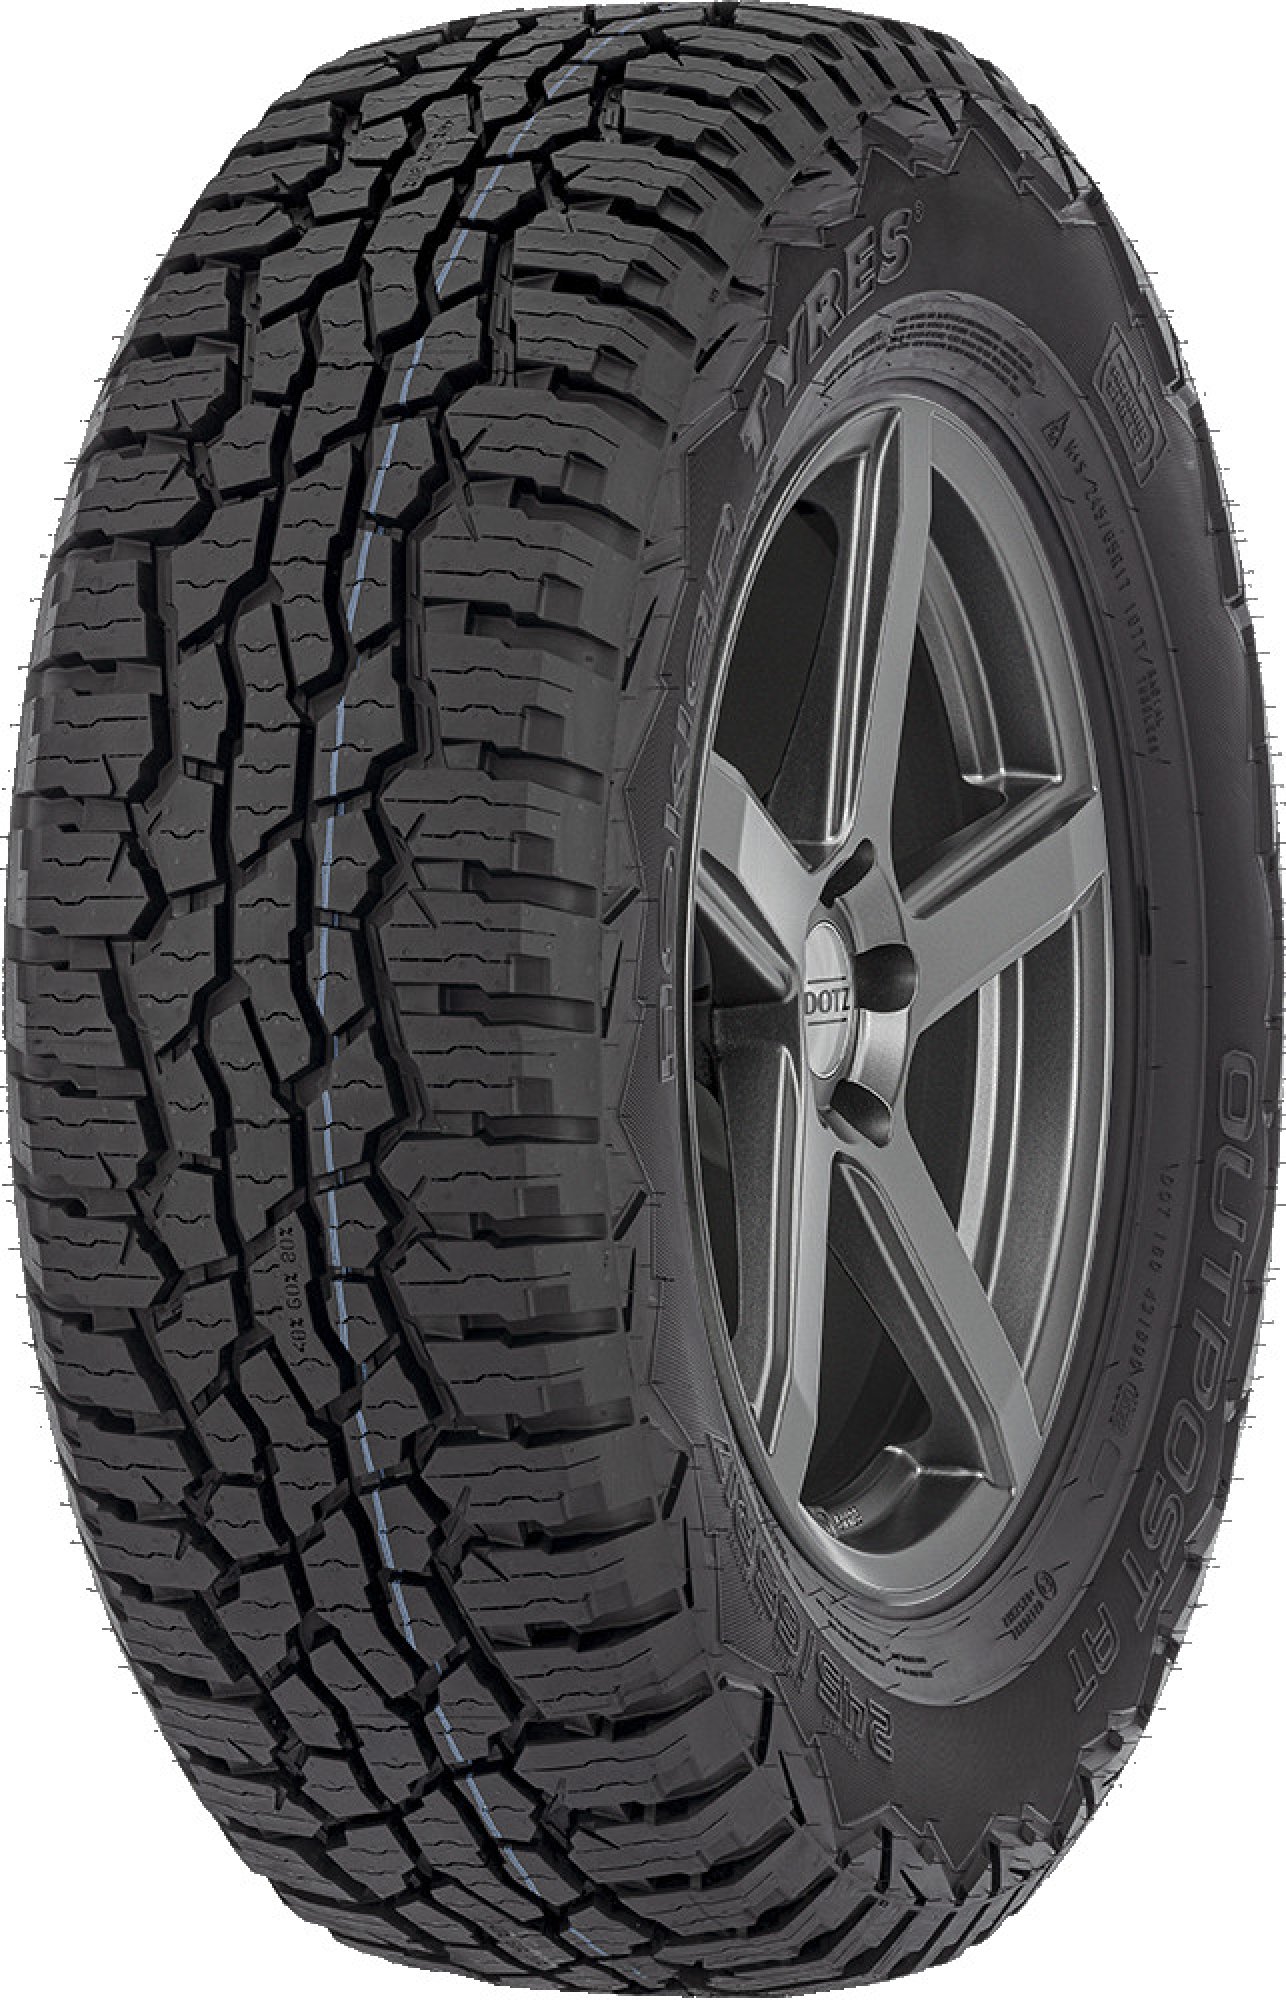 NOKIAN TYRES OUTPOST AT 255/75 R 17 115S